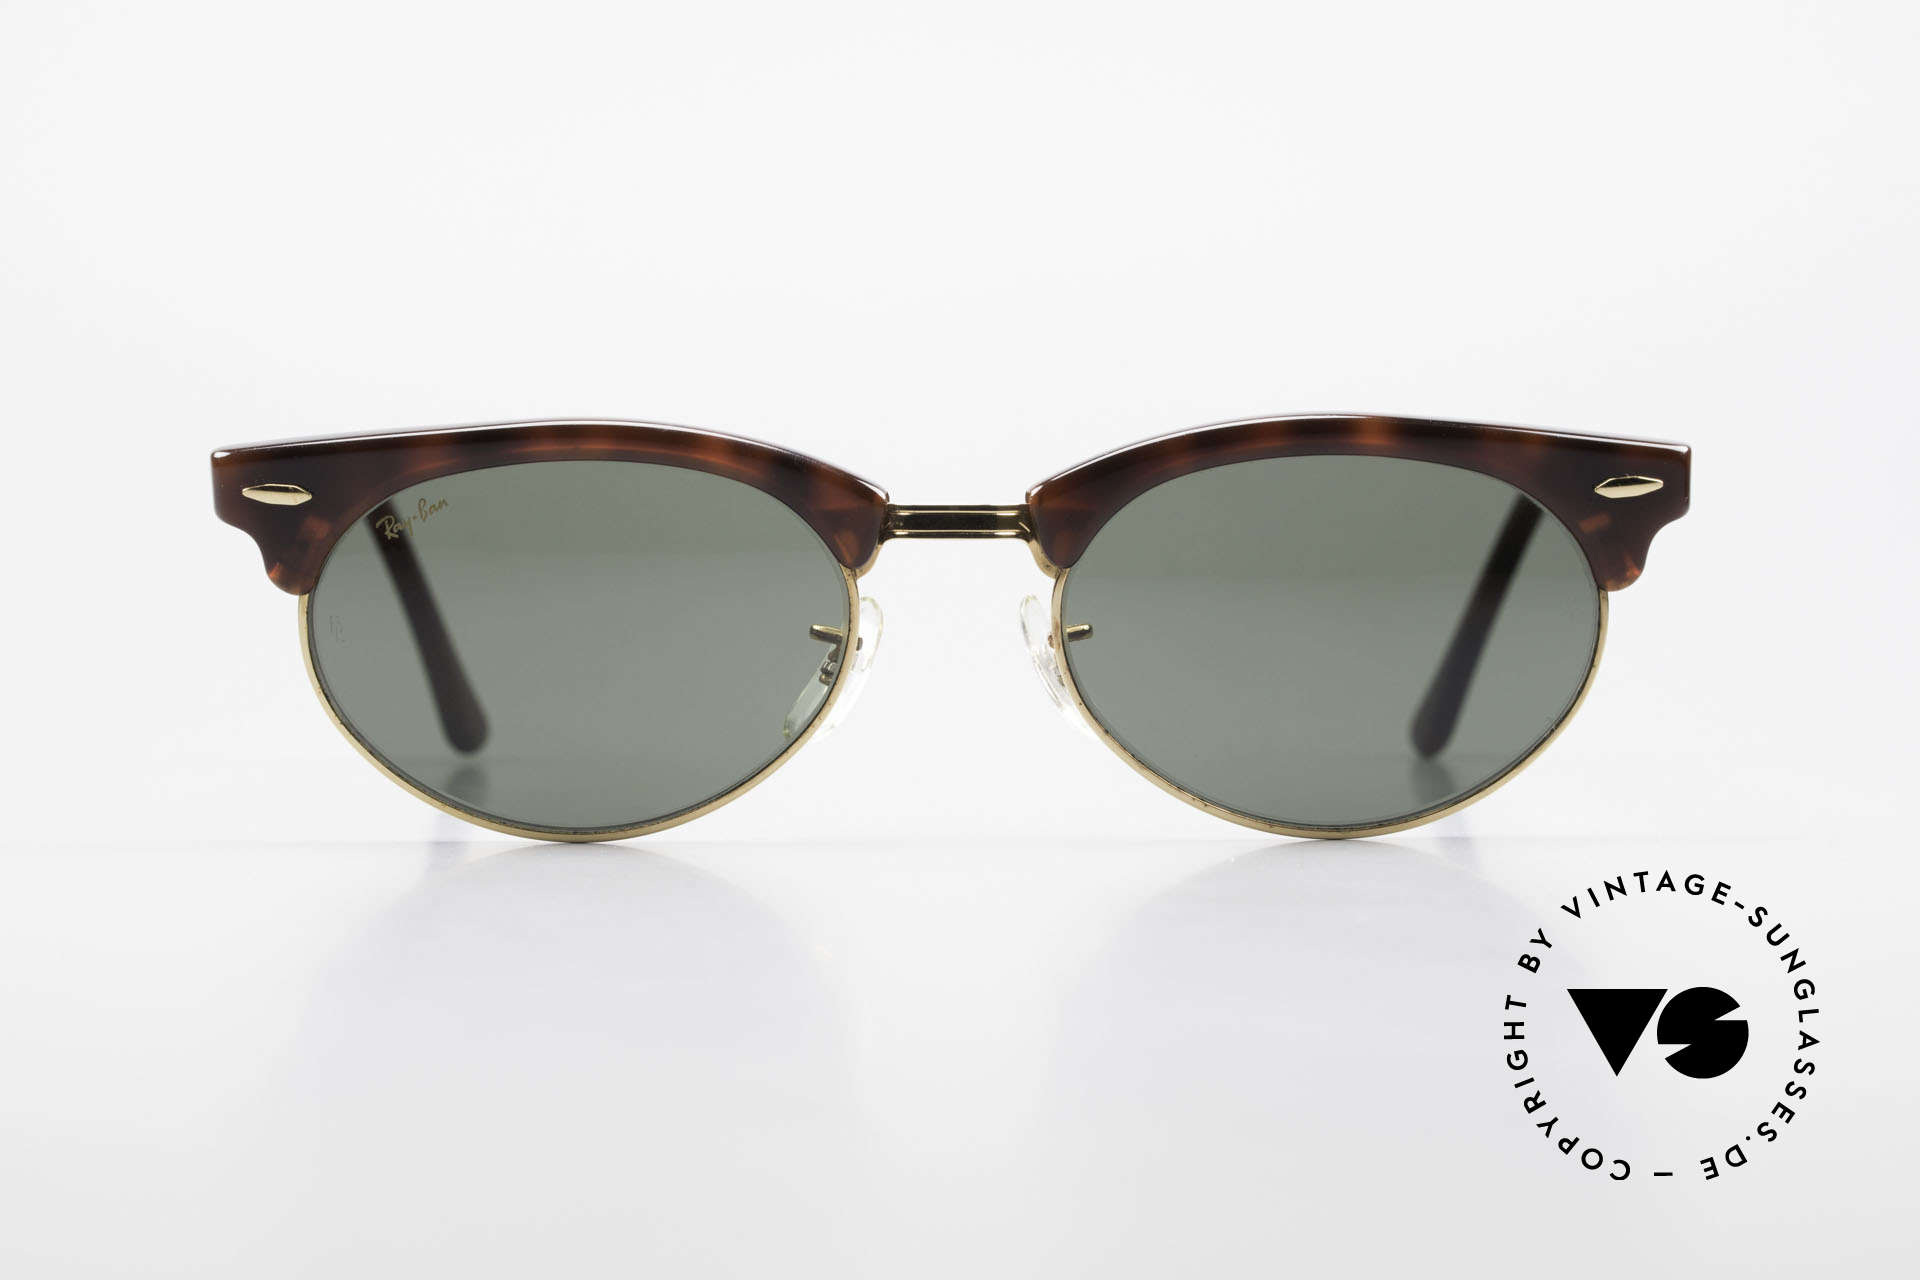 Ray Ban Clubmaster Oval 80's Bausch & Lomb Original, still one of the most popular vintage sunglasses, Made for Men and Women